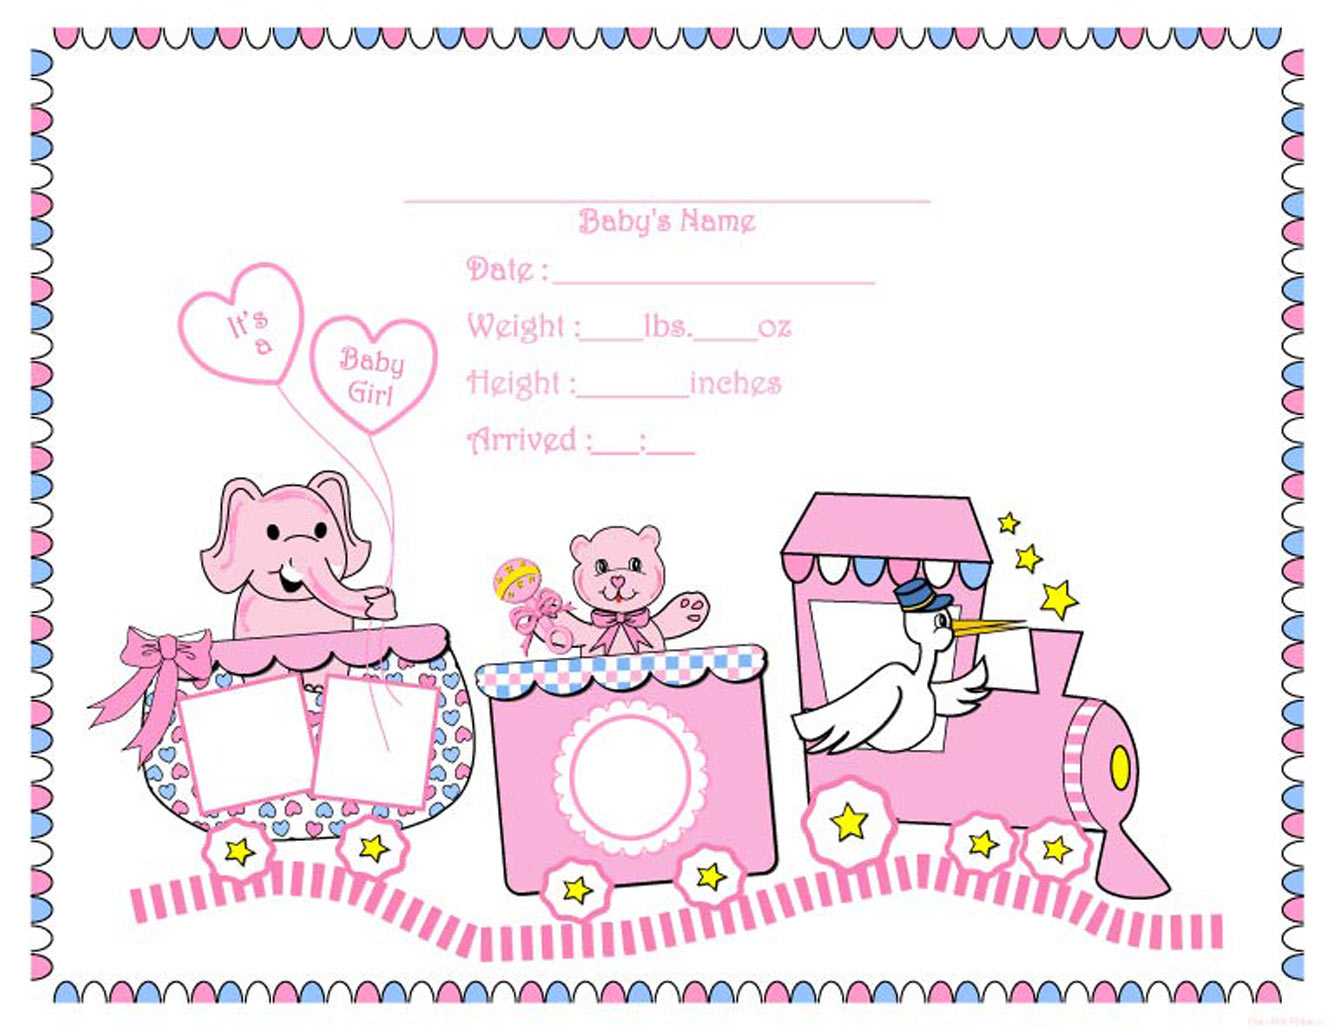 4570Book | Hd |Ultra | Birth Certificate Clipart Pack #4806 Pertaining To Girl Birth Certificate Template